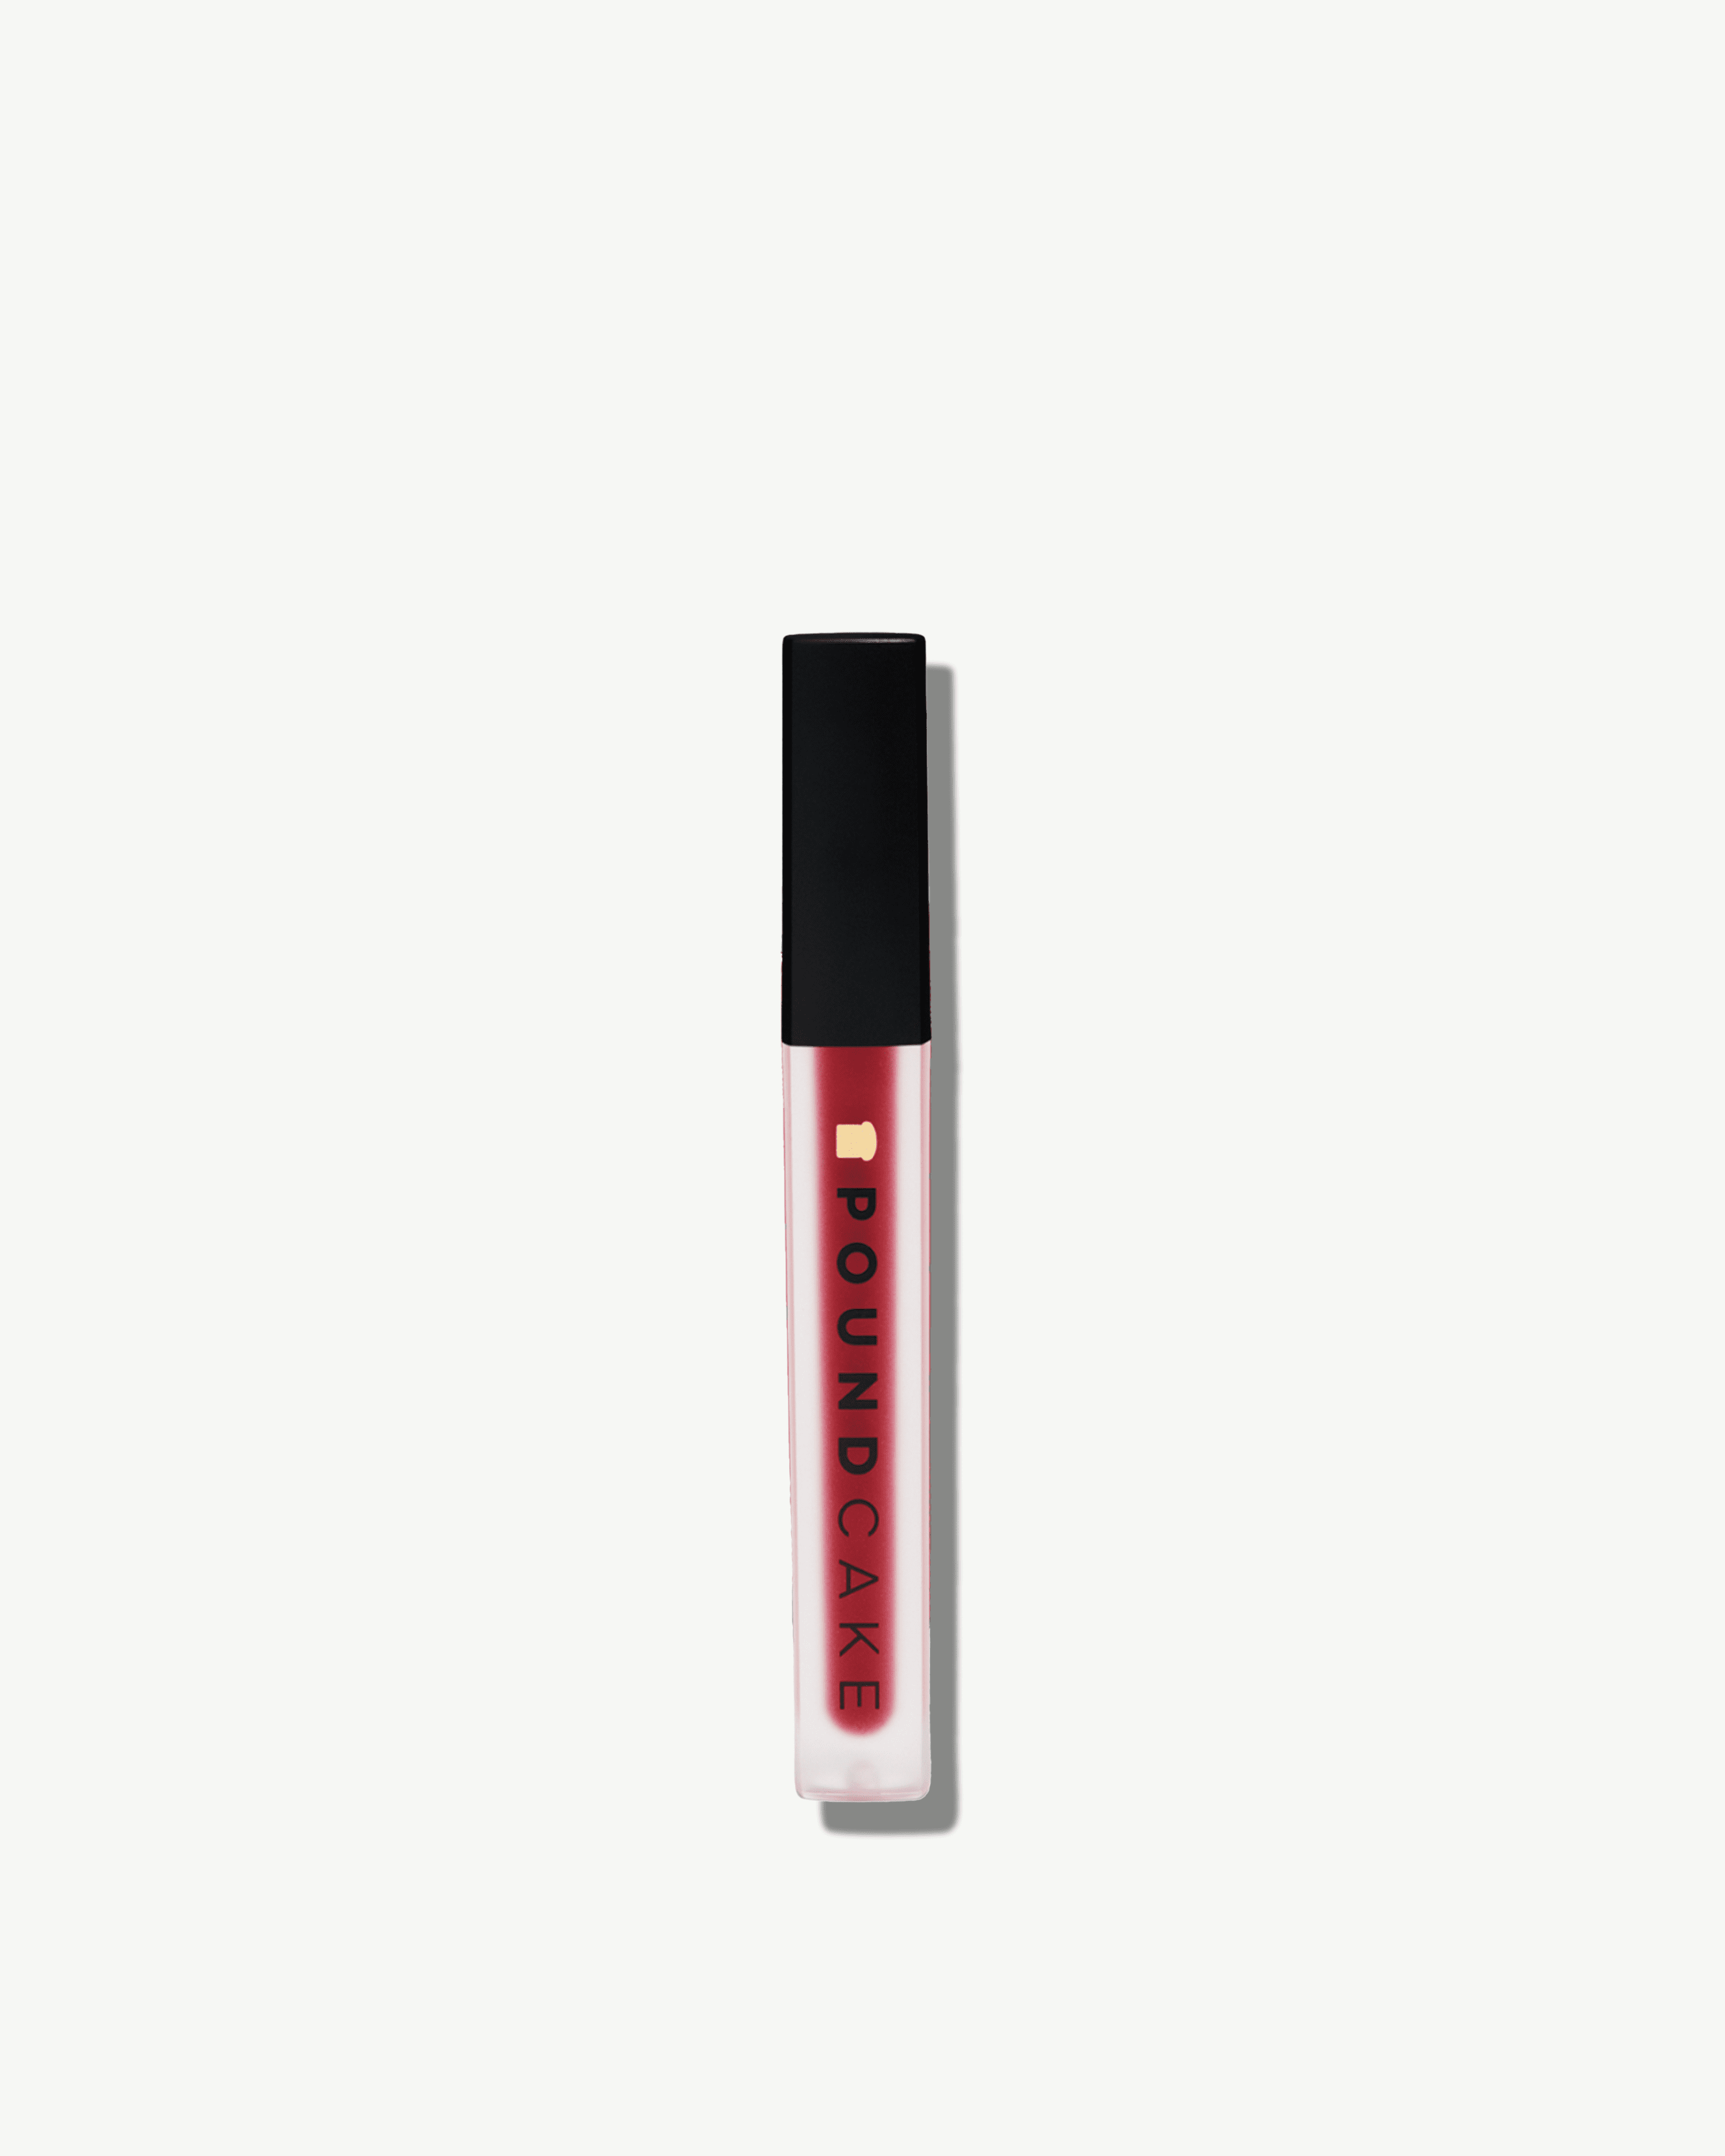 Bloodberry (deep blue-red on deeper lip tones, and a berry-red on lighter lip tones)